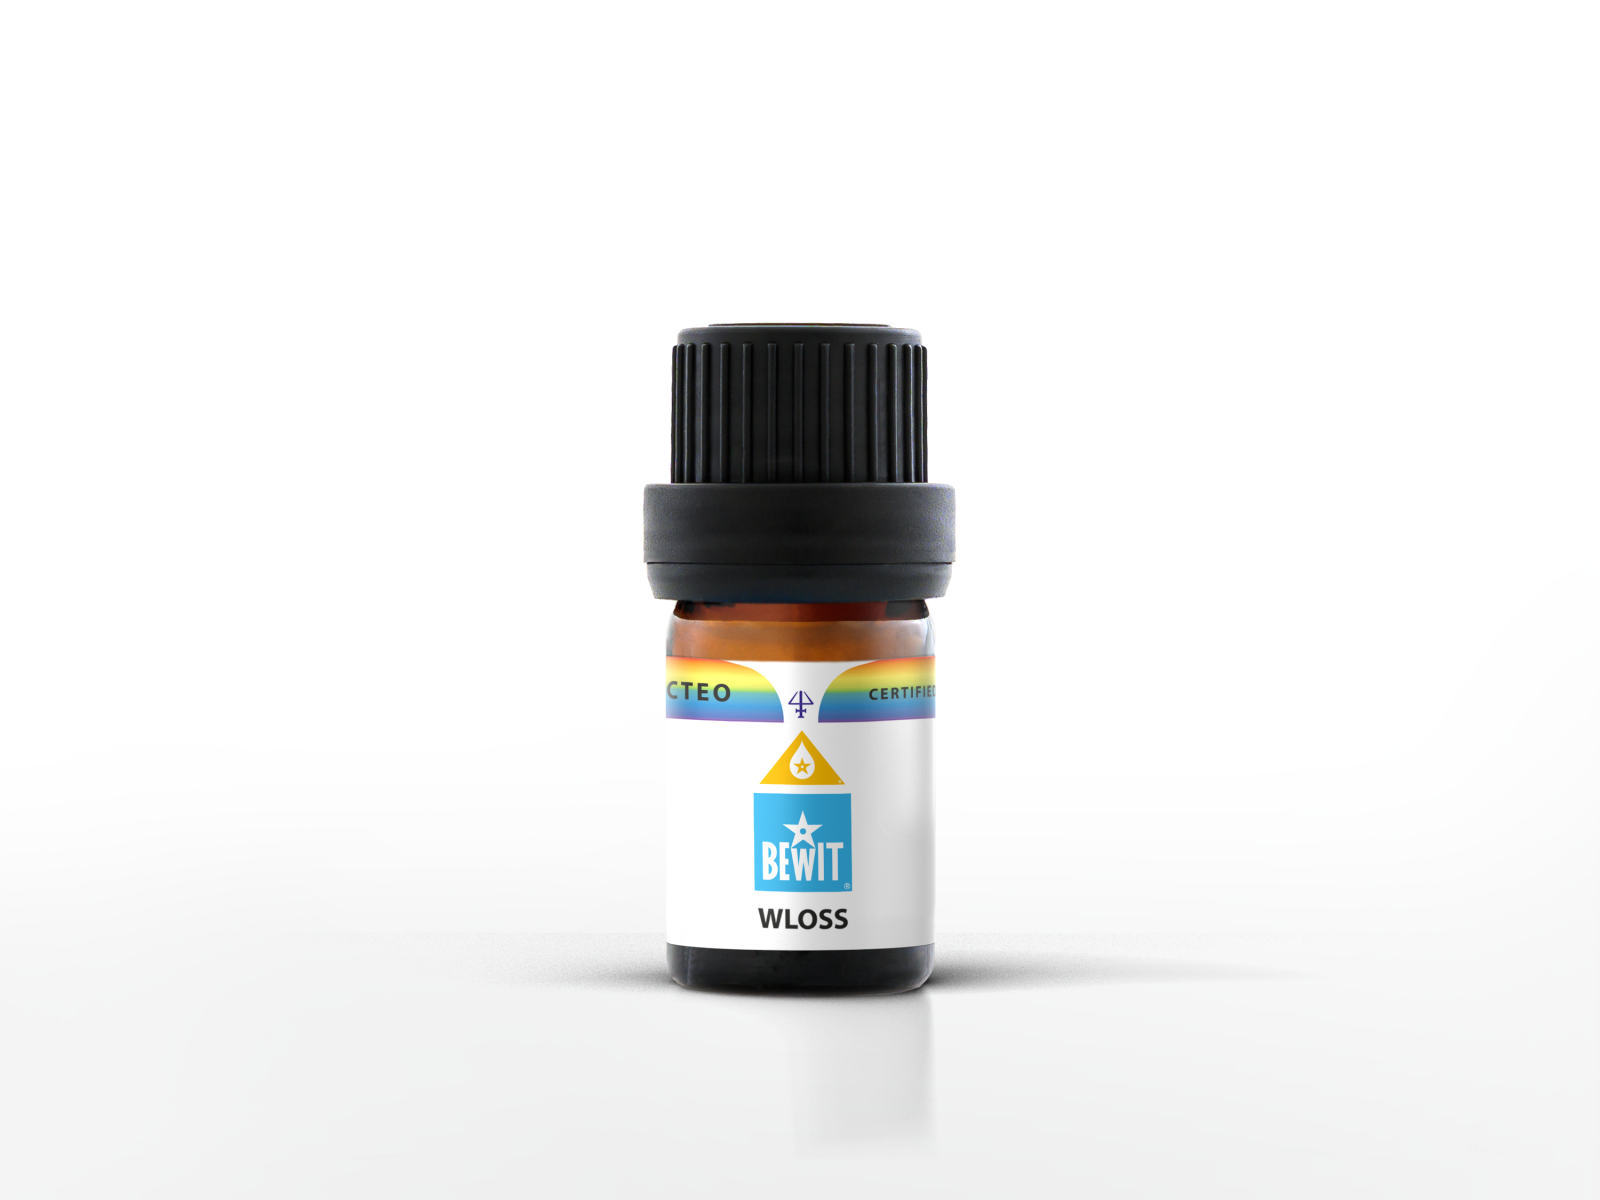 BEWIT WLOSS - A unique blend of the essential oils - 2